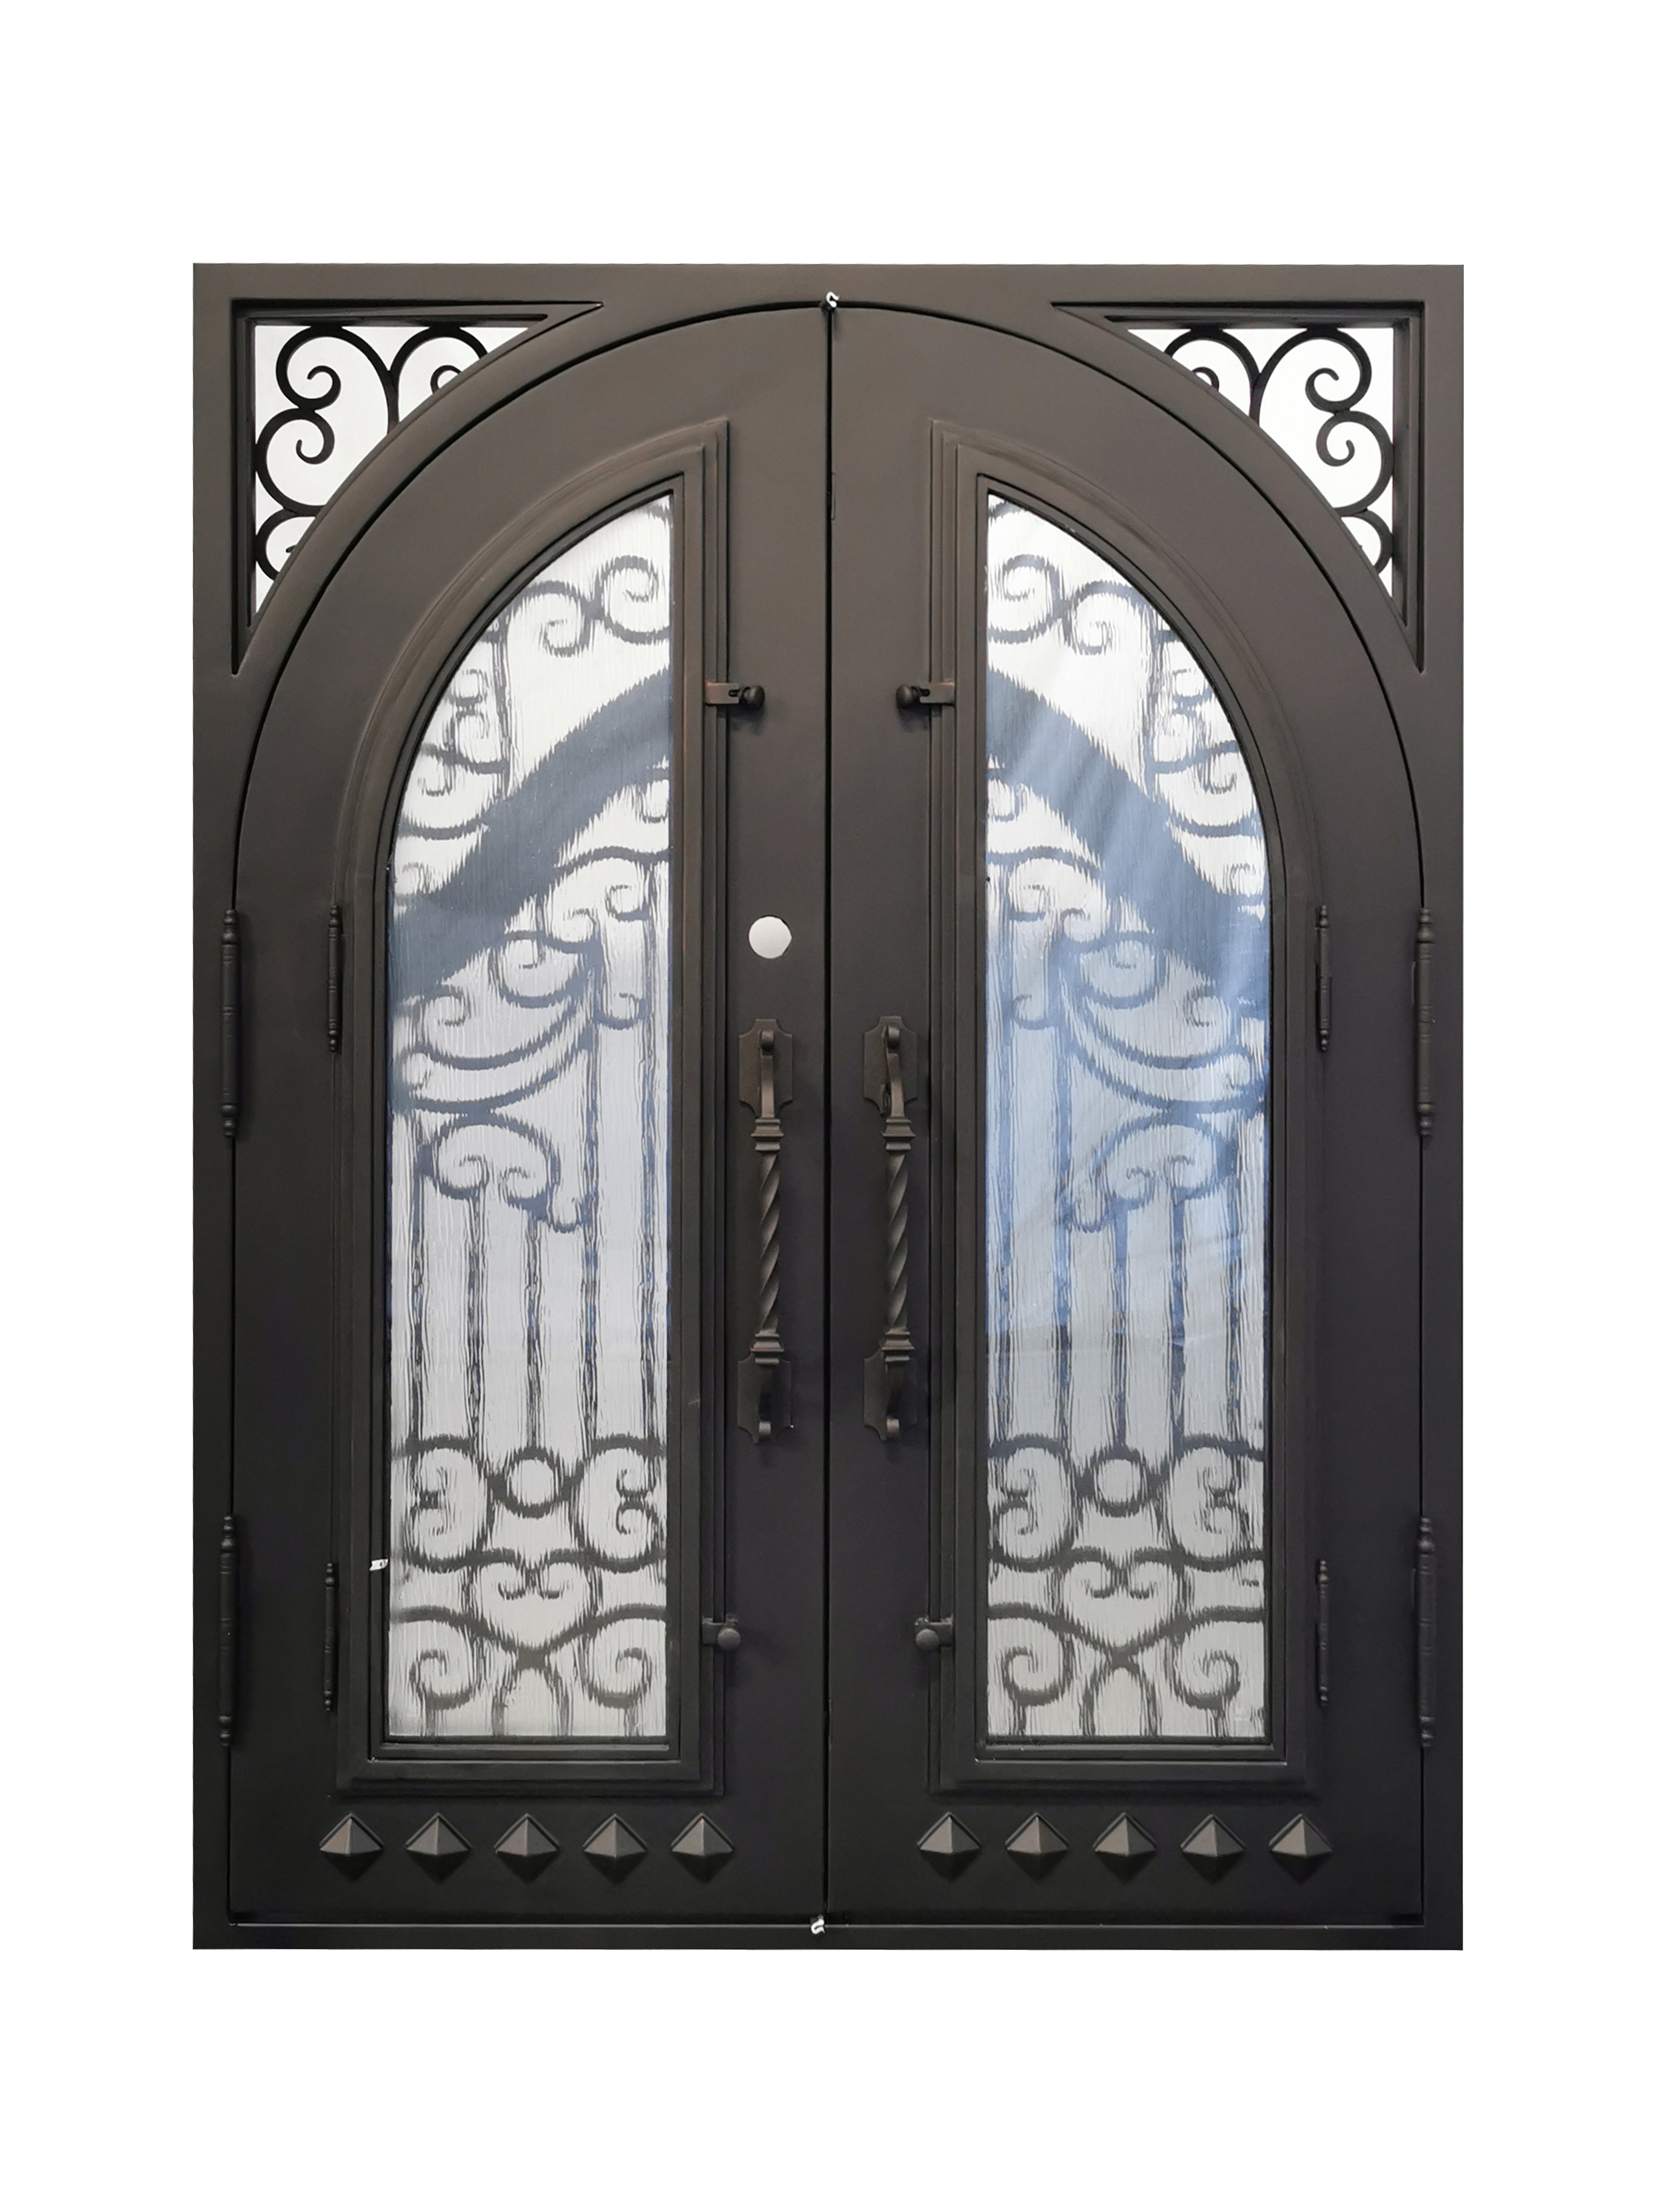 Cresson Model Double Front Entry Iron Door With Tempered Rain Glass Dark Bronze Finish - AAWAIZ IMPORTS